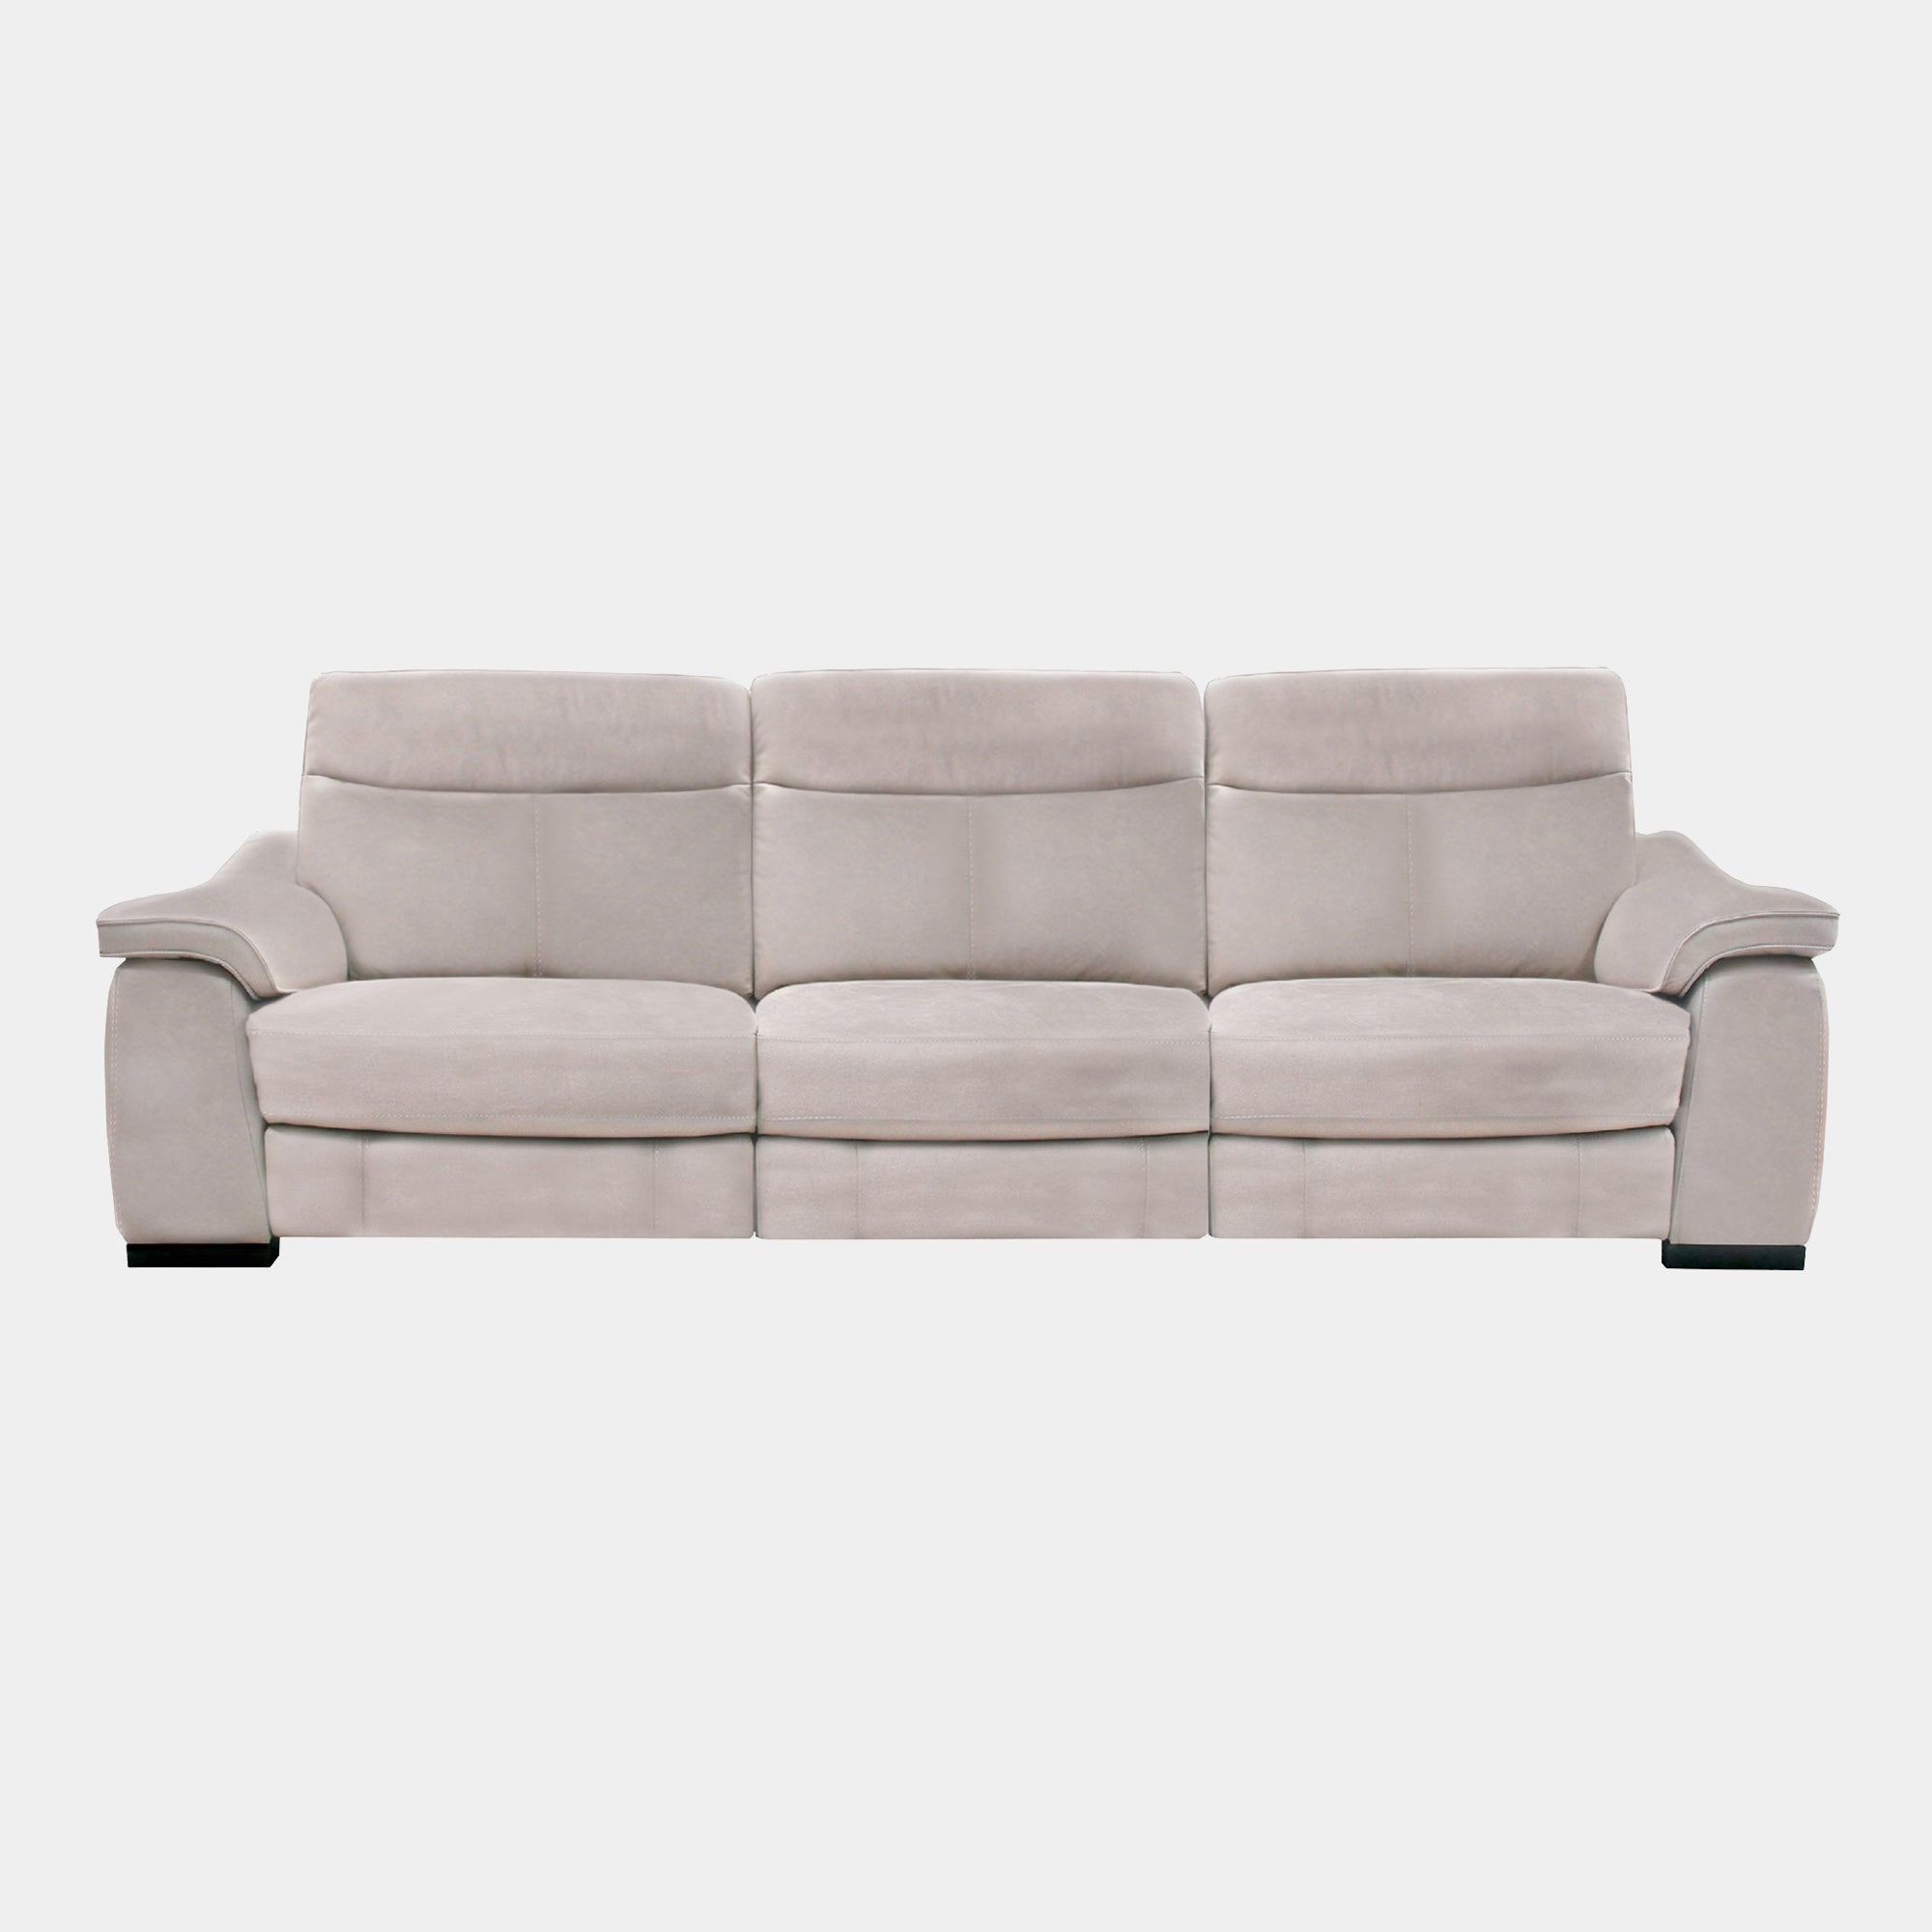 Caruso - 3 Seat 2 Manual Recliner Sofa In Fabric Or Leather Fabric